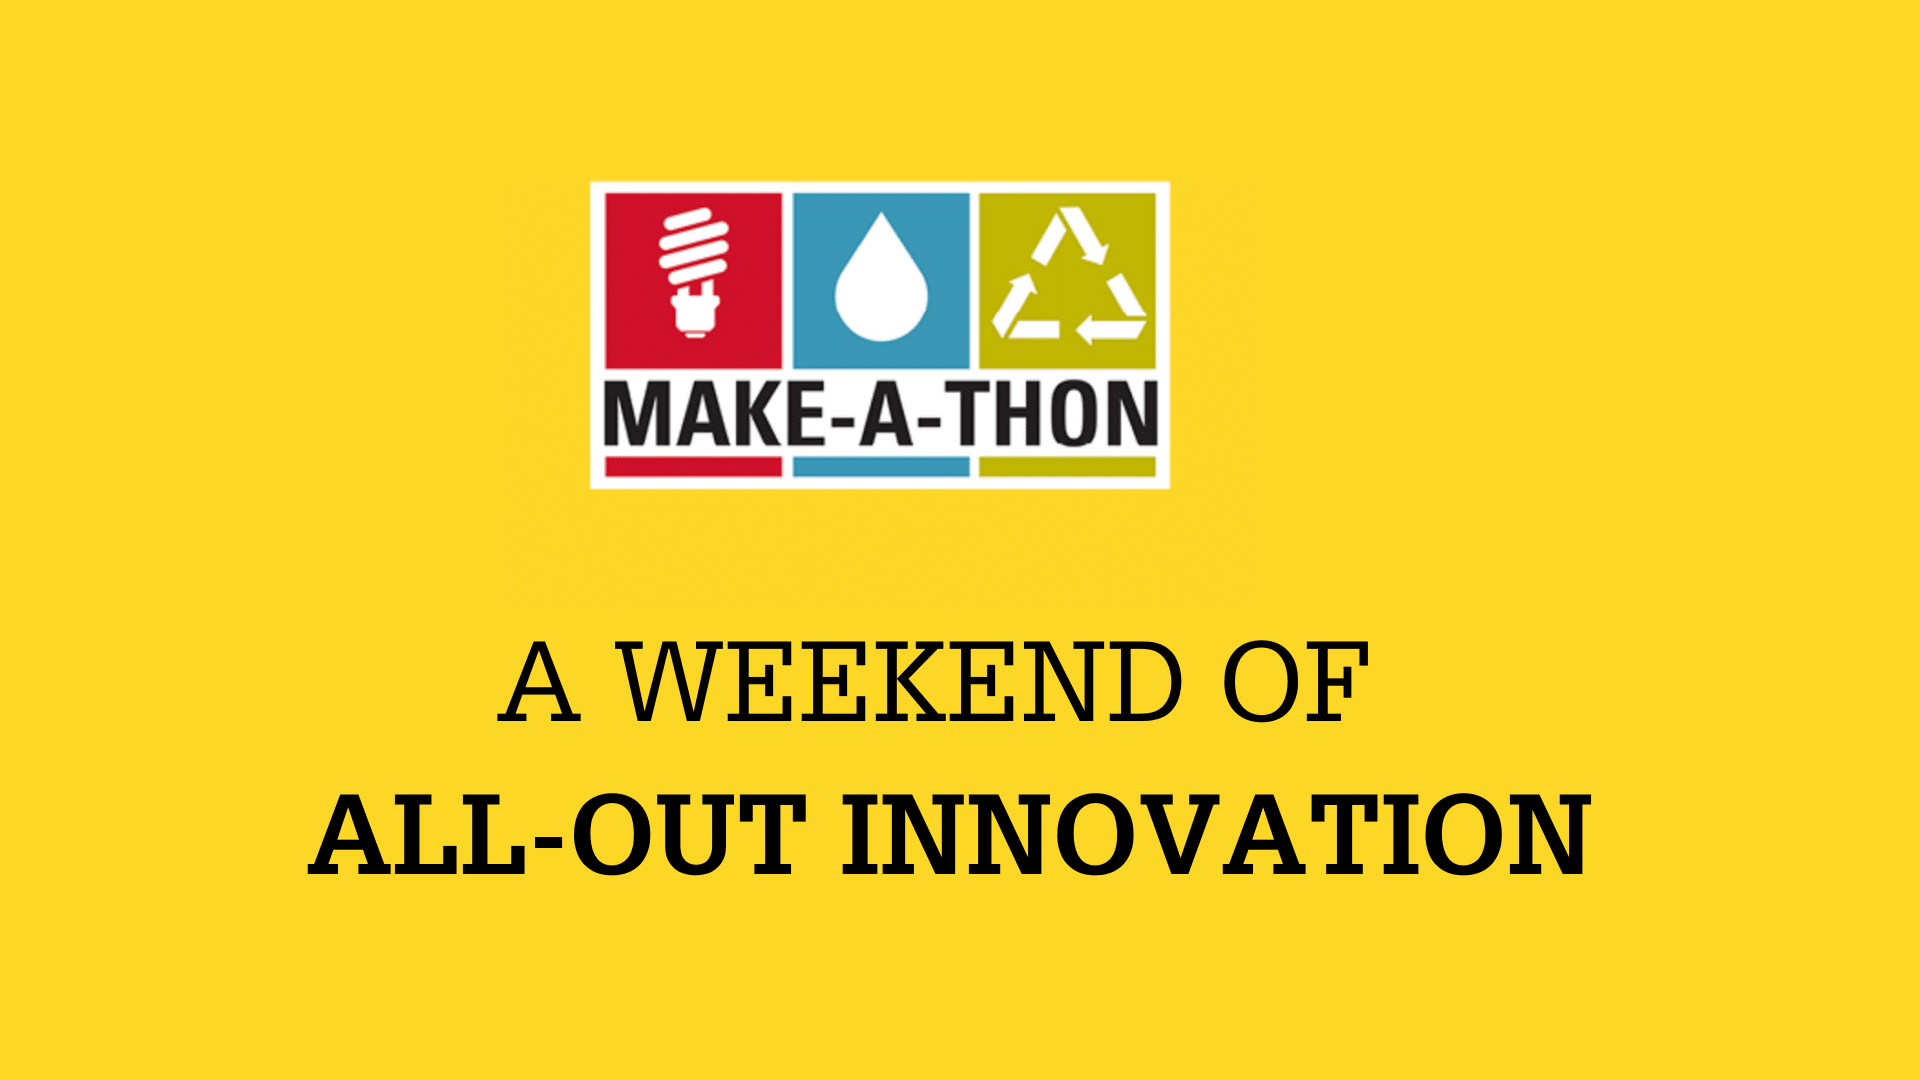 A weekend of all-out innovation